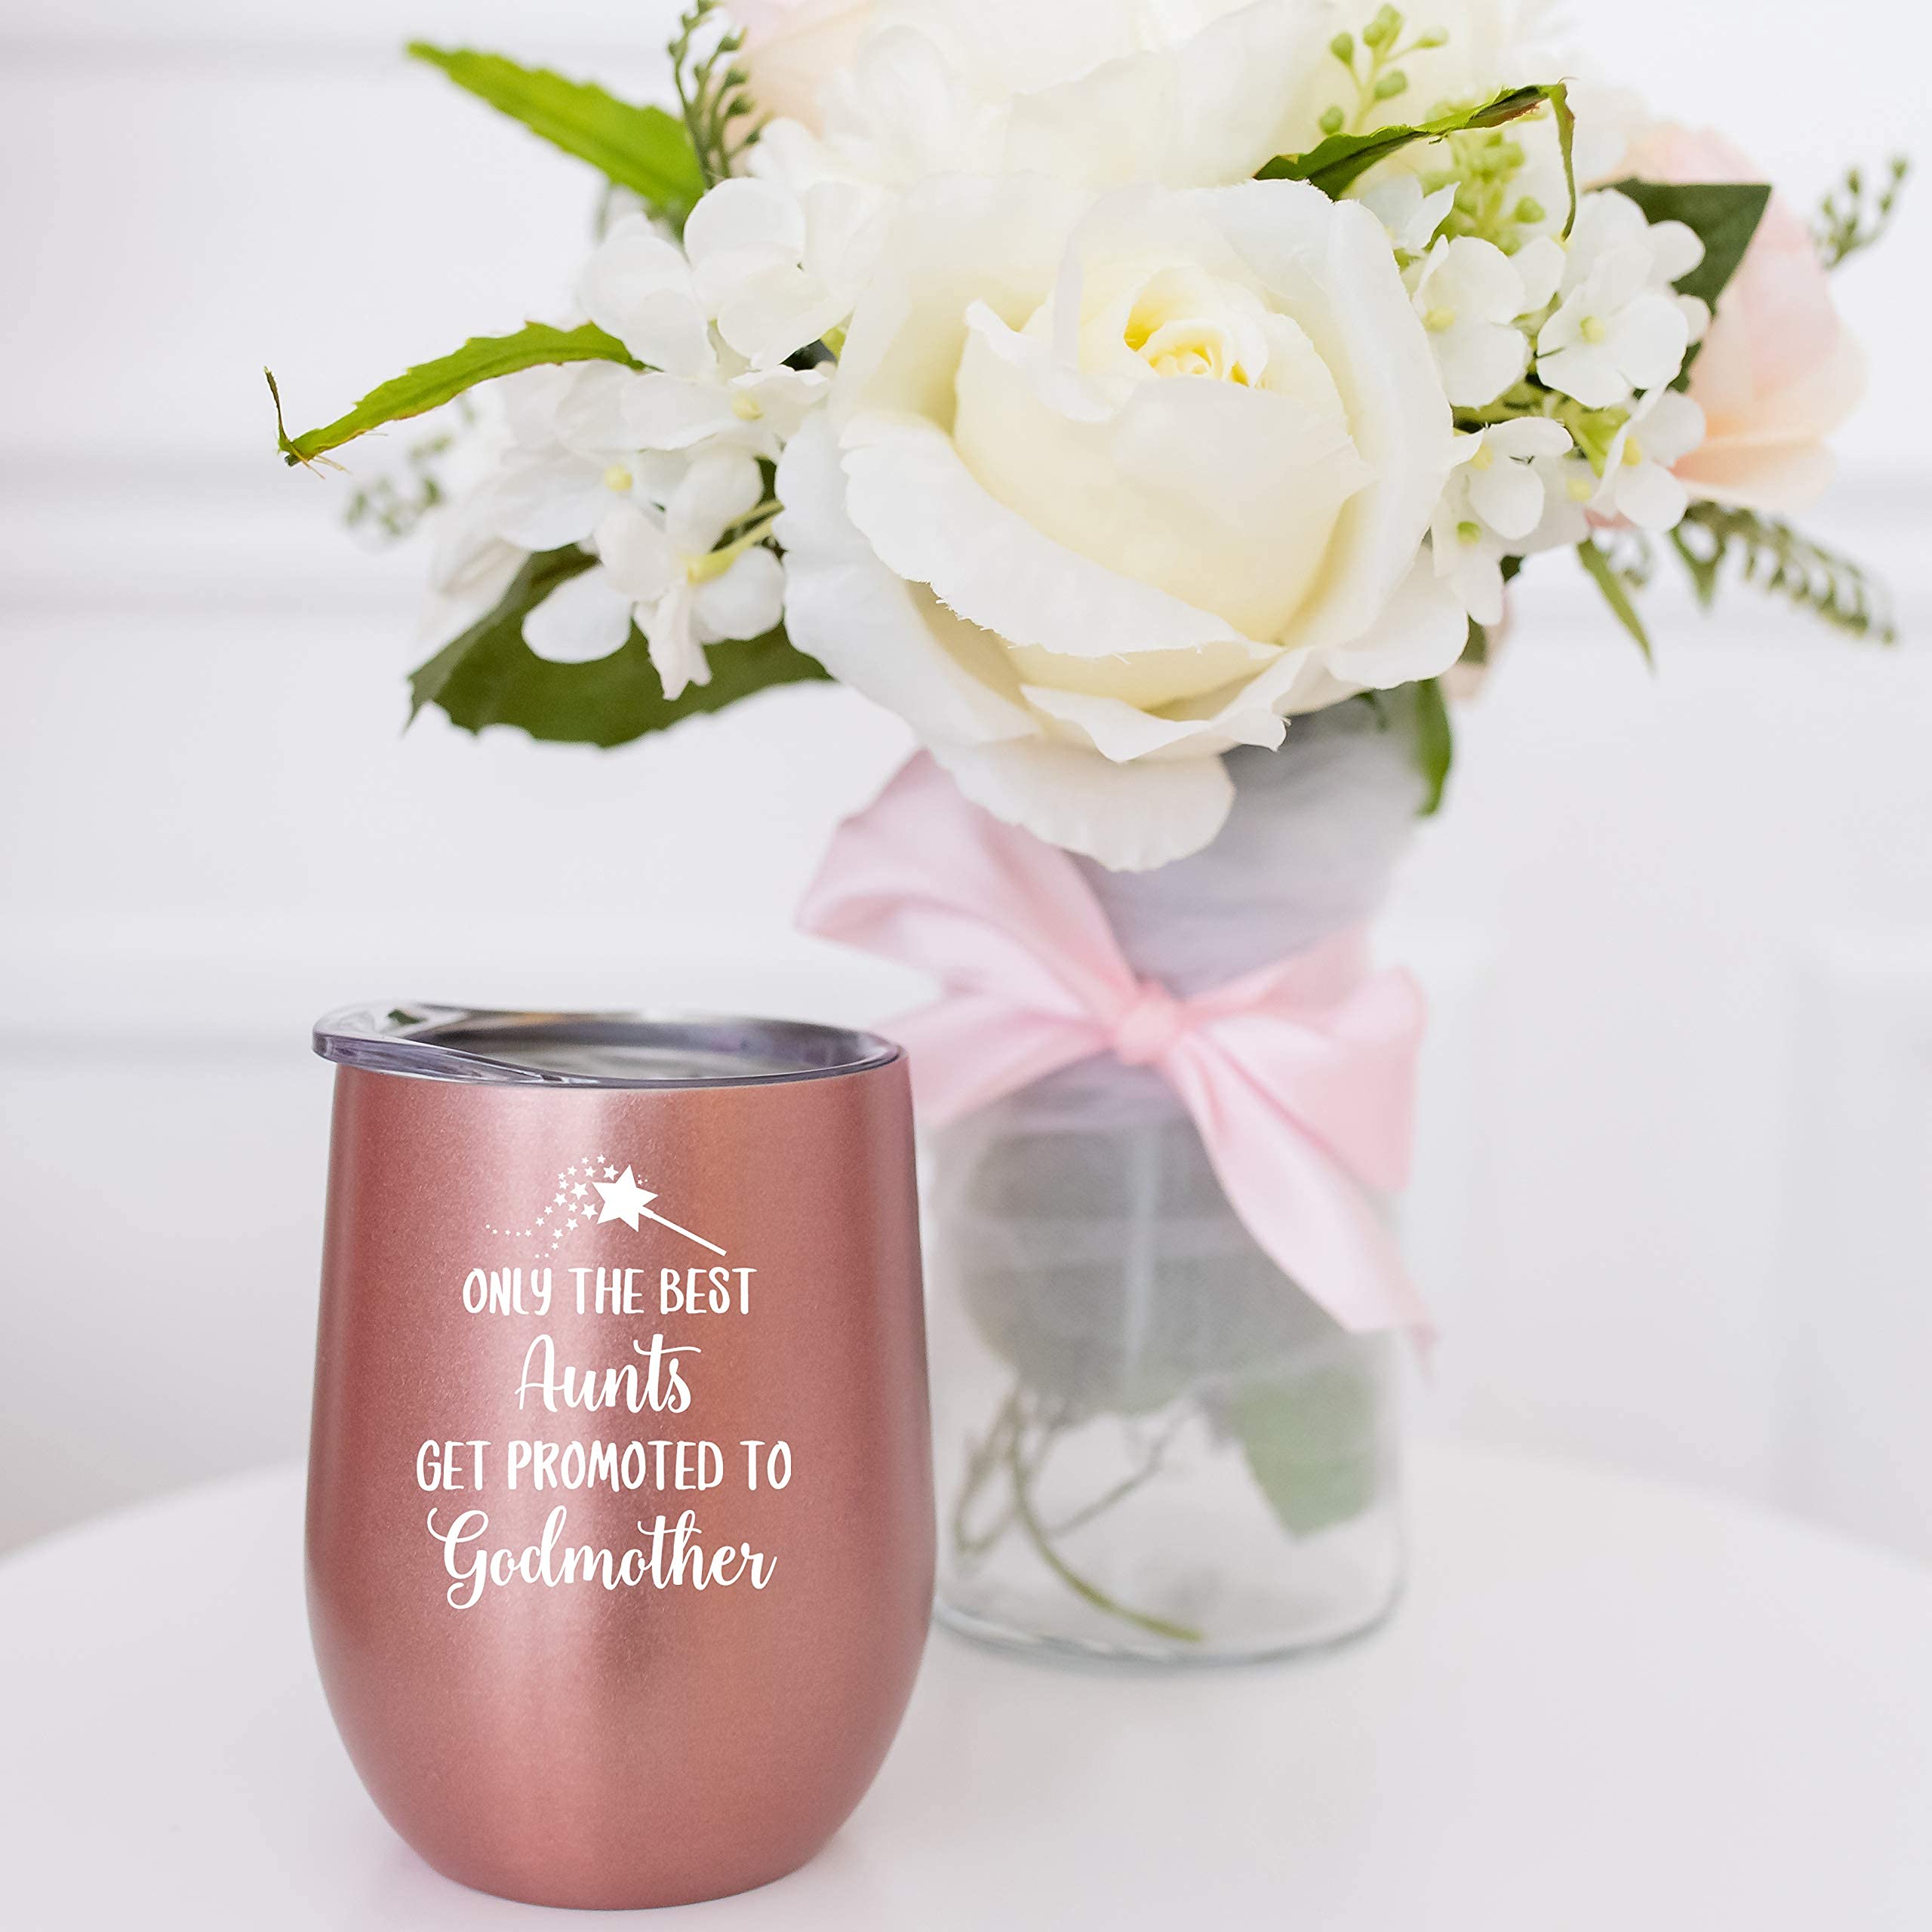 Only The Best Aunts Get Promoted to Godmother 12oz Wine Glass Tumbler Godmother Proposal Gifts